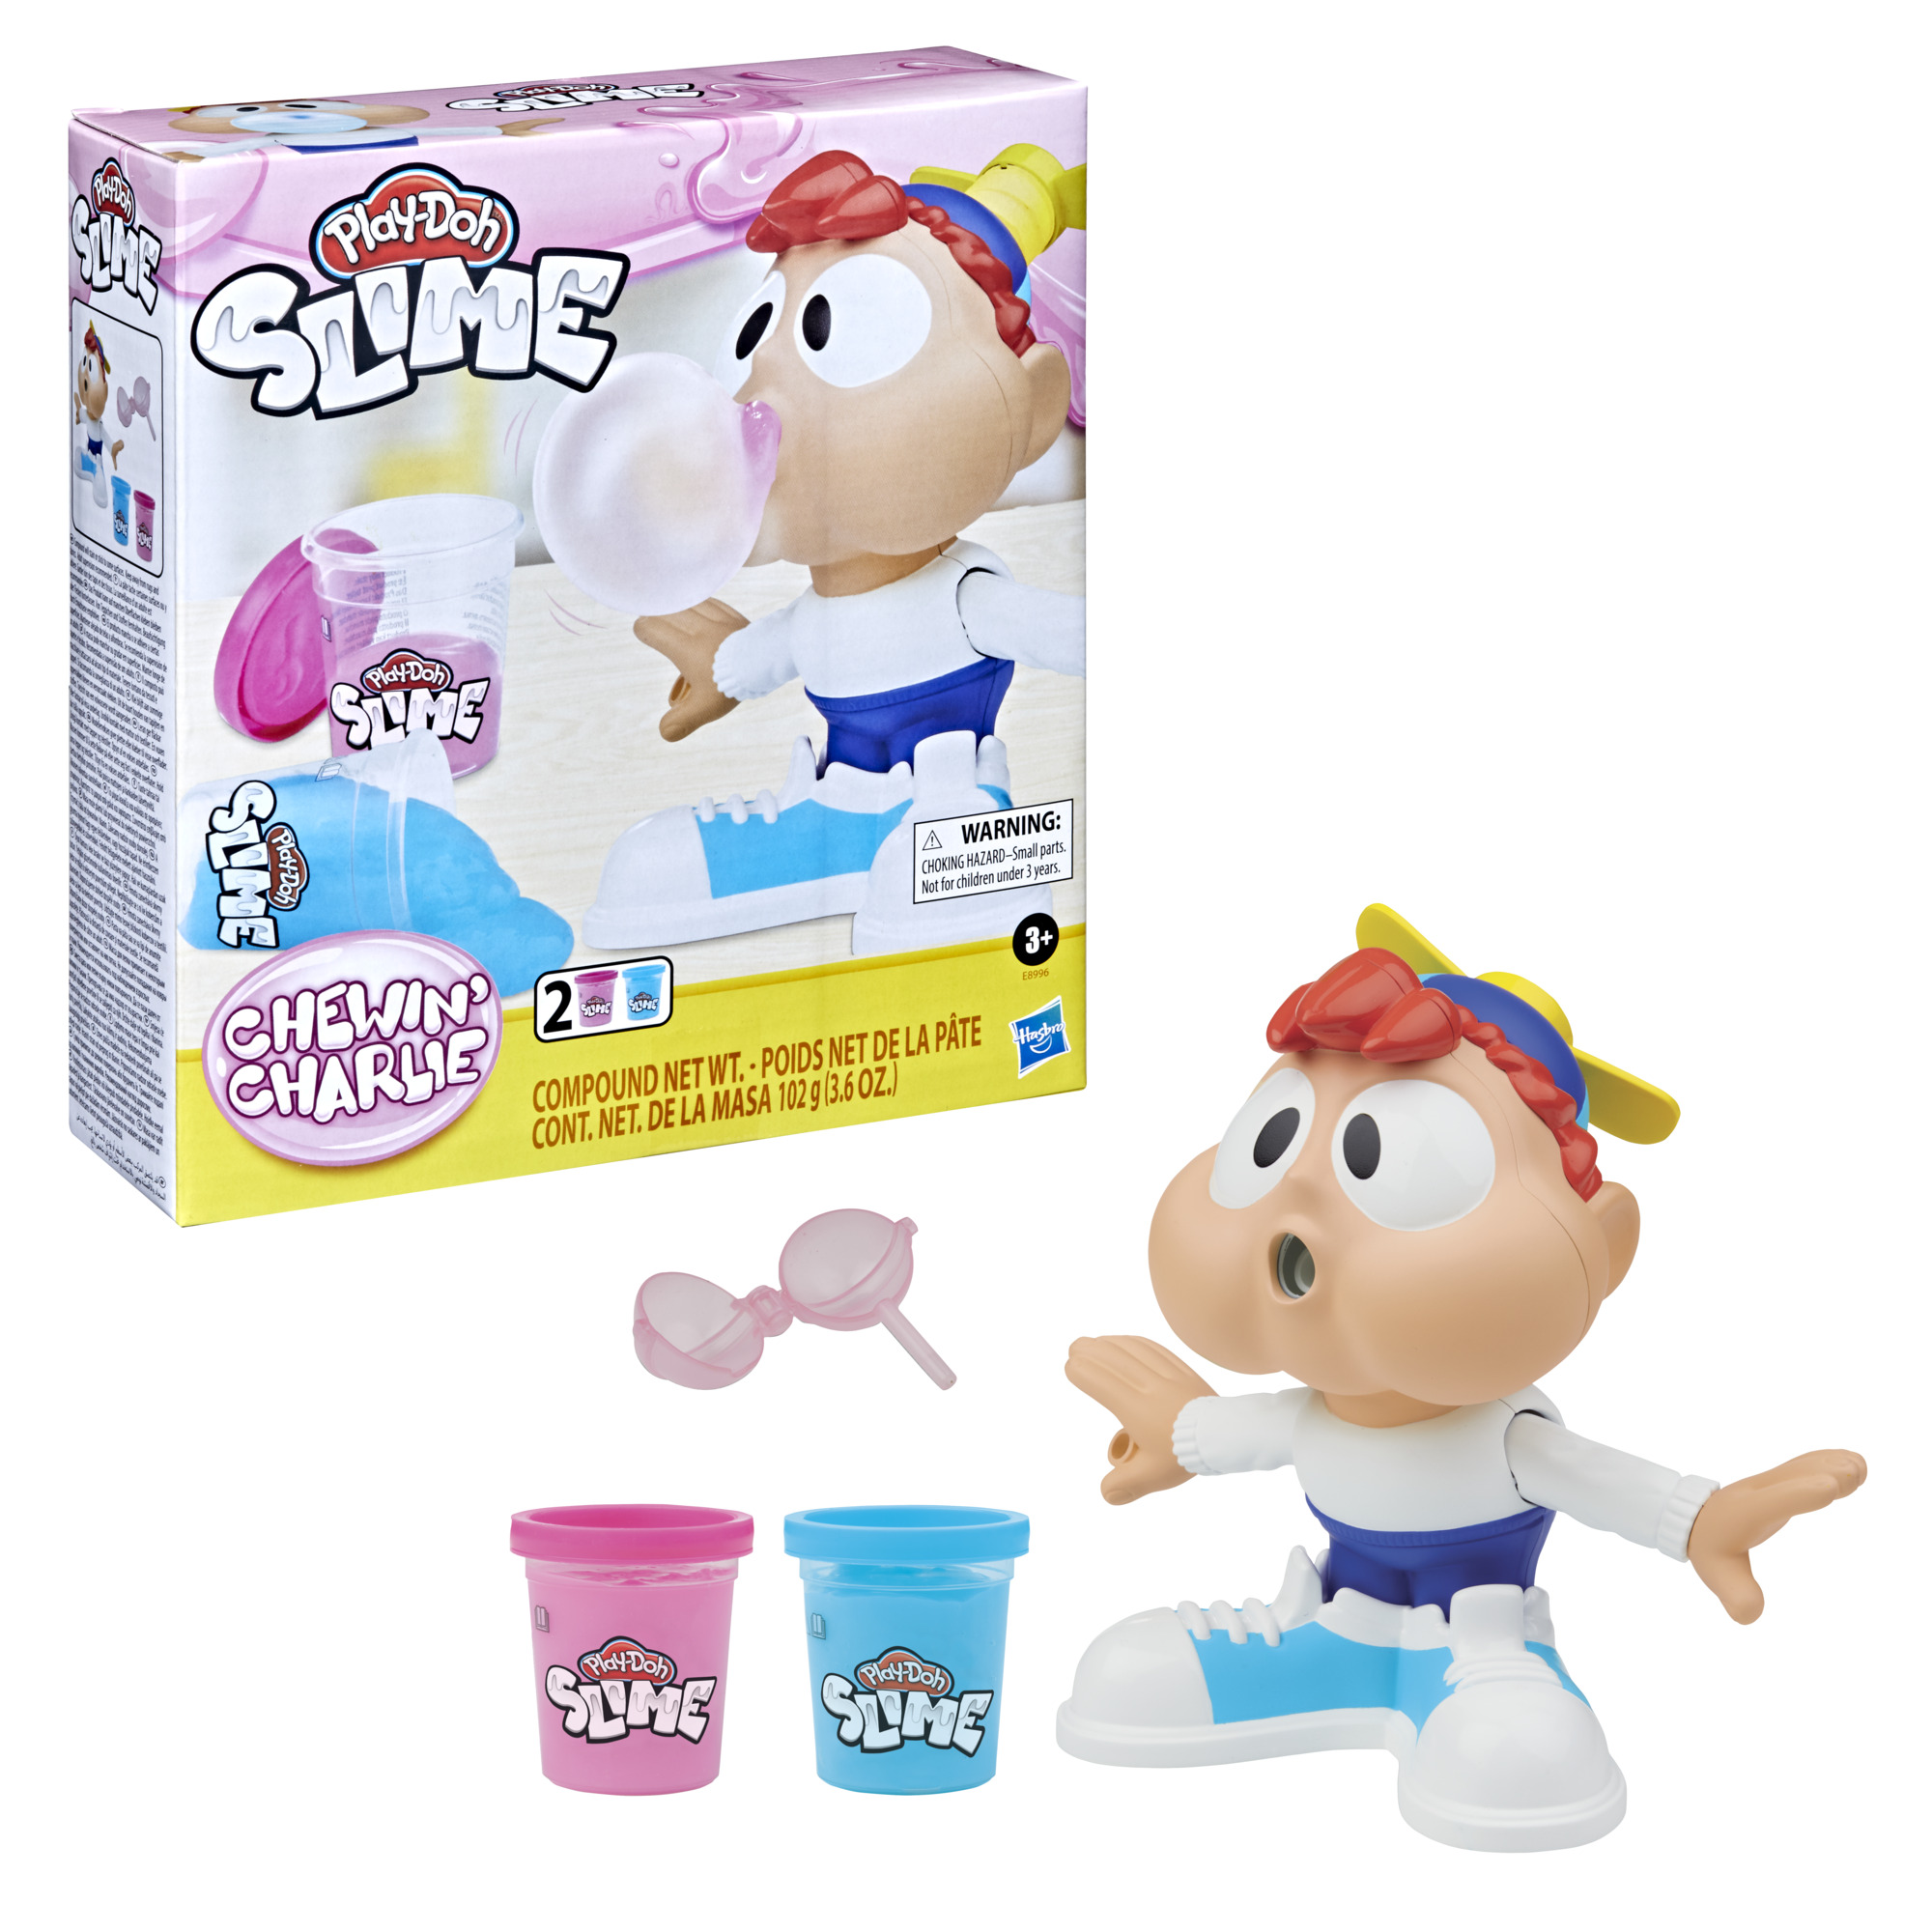 Play-Doh Slime Chewin' Charlie Slime Bubble Maker Toy - image 1 of 6